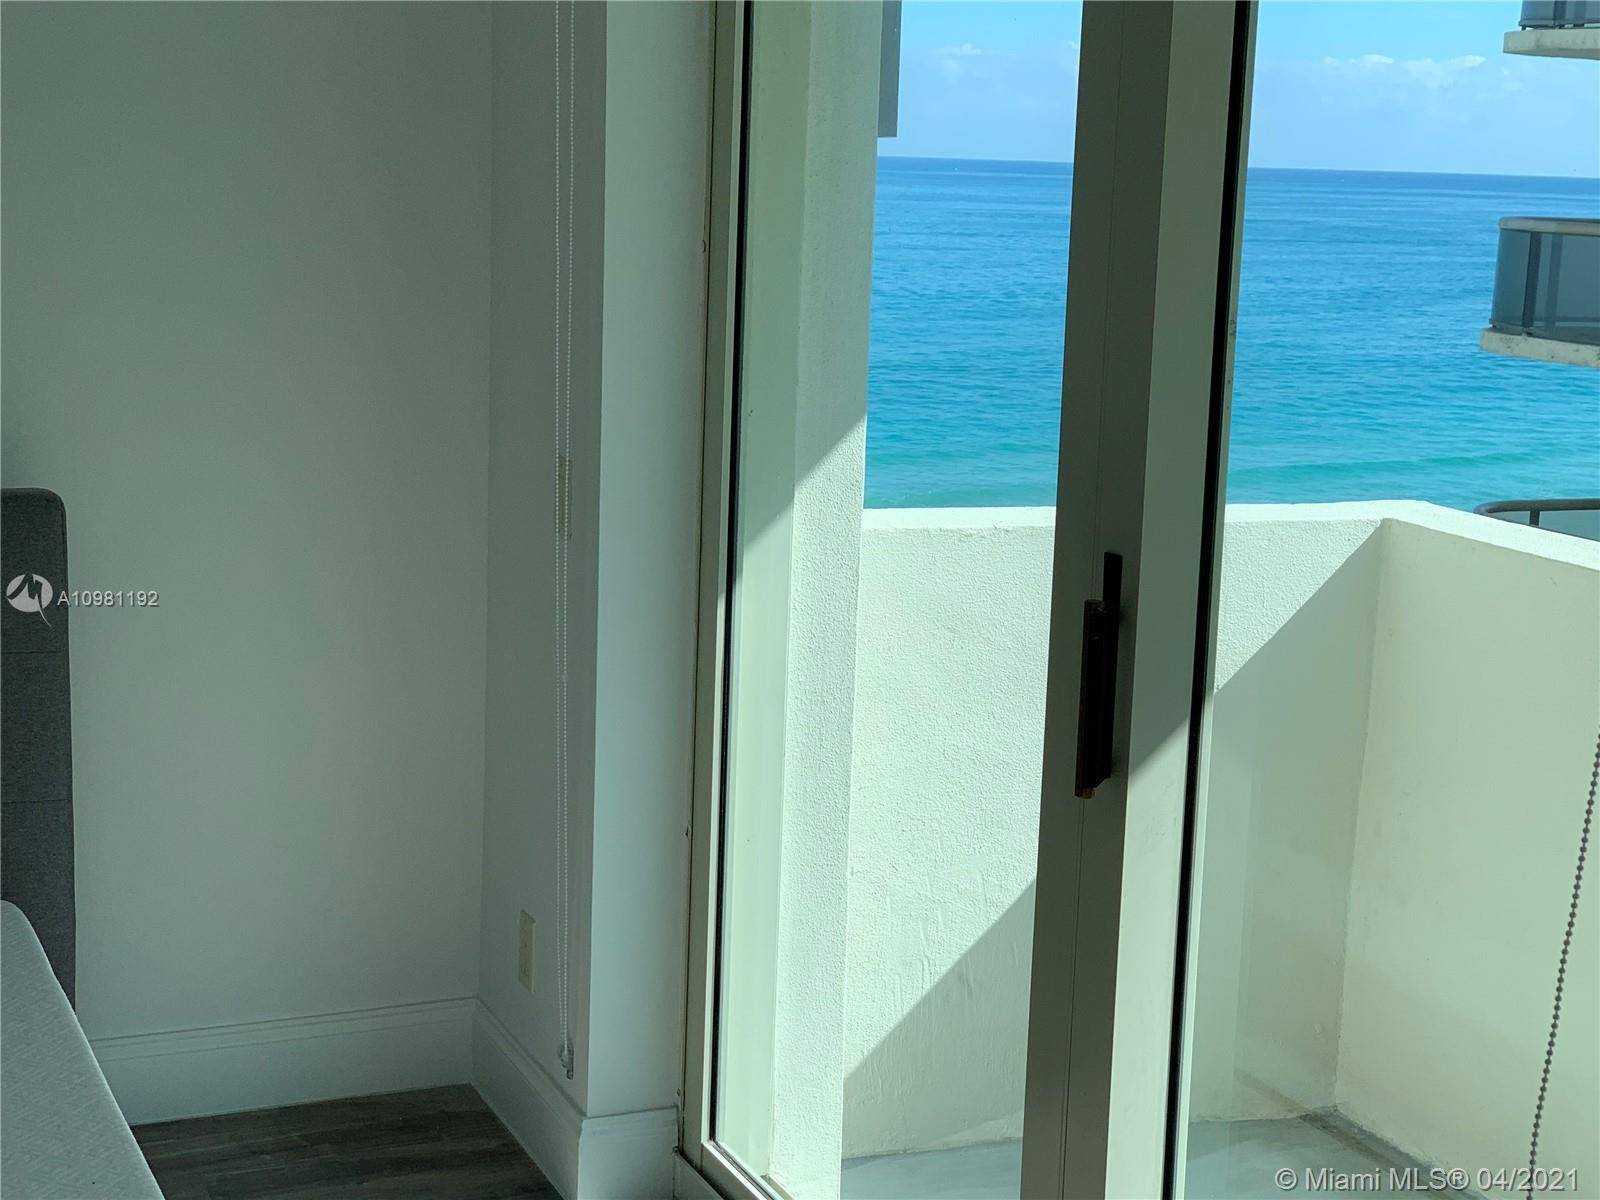 Surfside Bal Harbour Live Style Ocean View apartment new conditions.